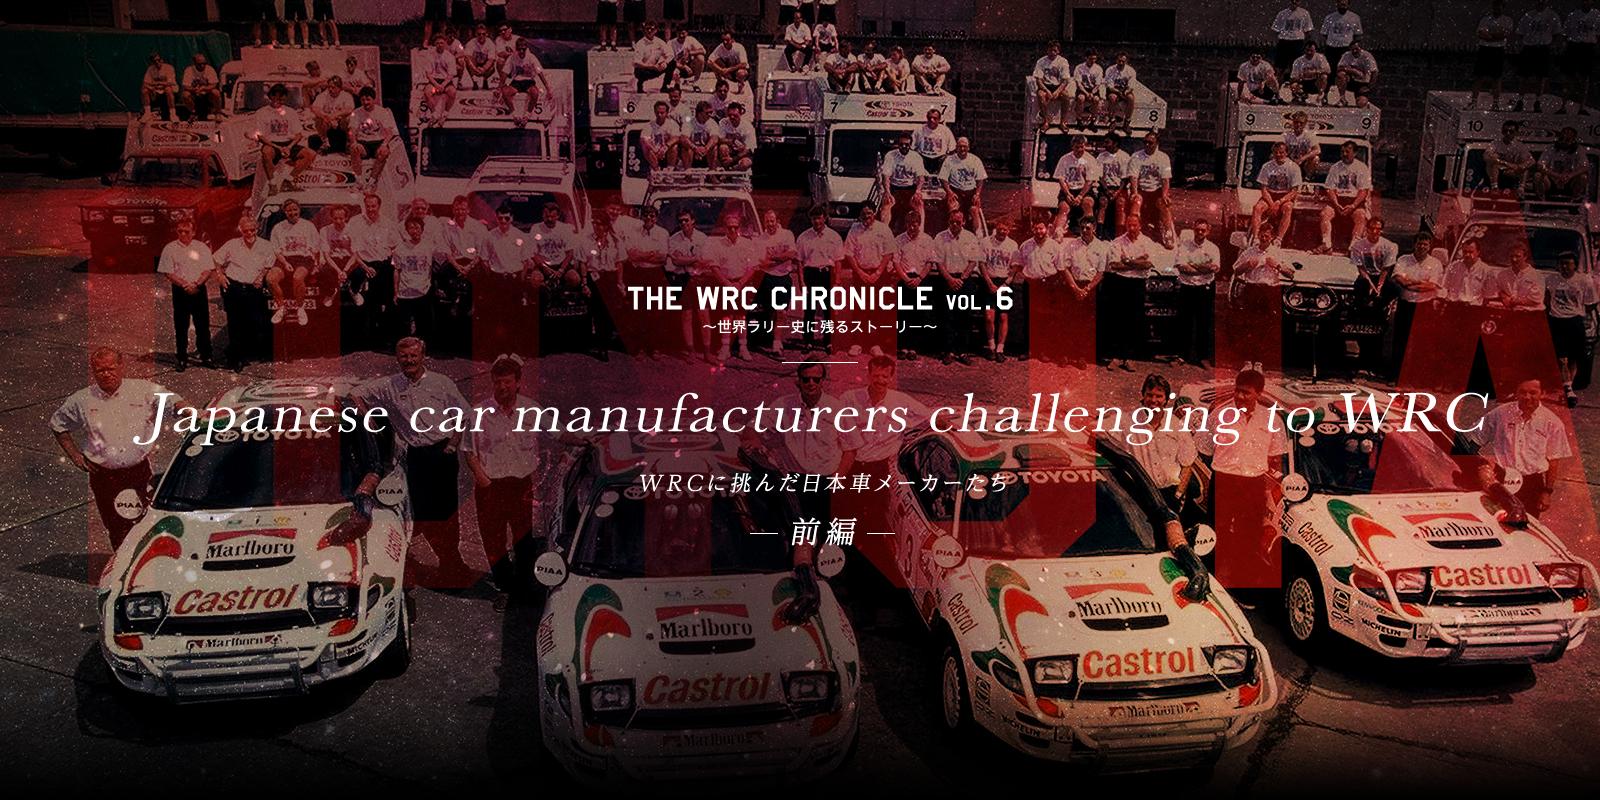 Japanese car manufacturers challenging to WRC 〜WRCに挑んだ日本車メーカーたち 前編〜 | The WRC Chronicle vol.6